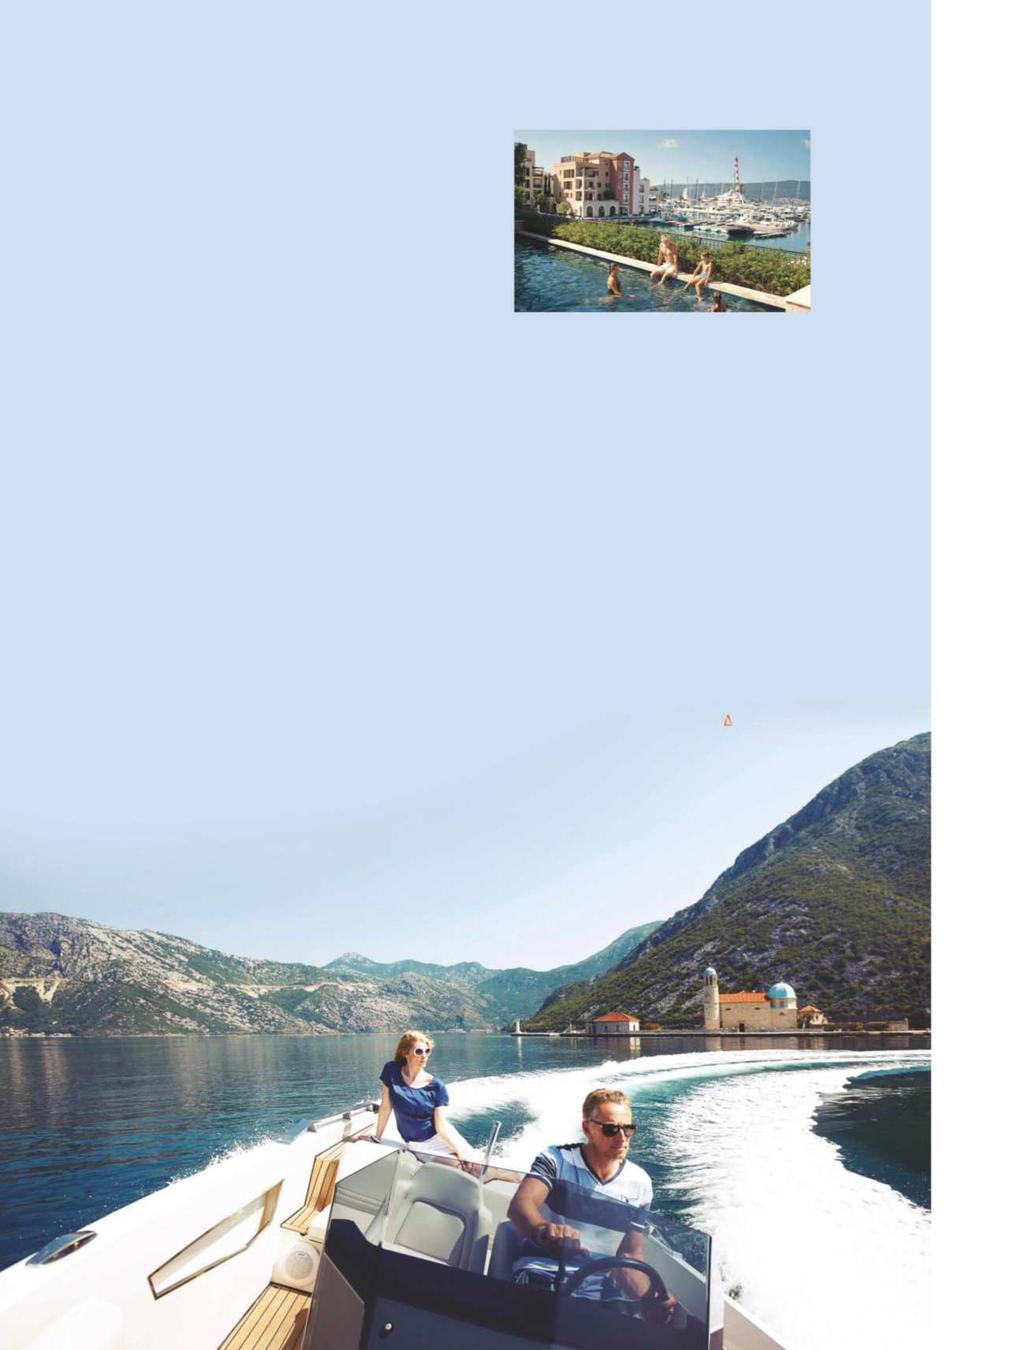 Porto Montenegro, is also determined to get the port and country on the map as a destination for high profile yachting events.